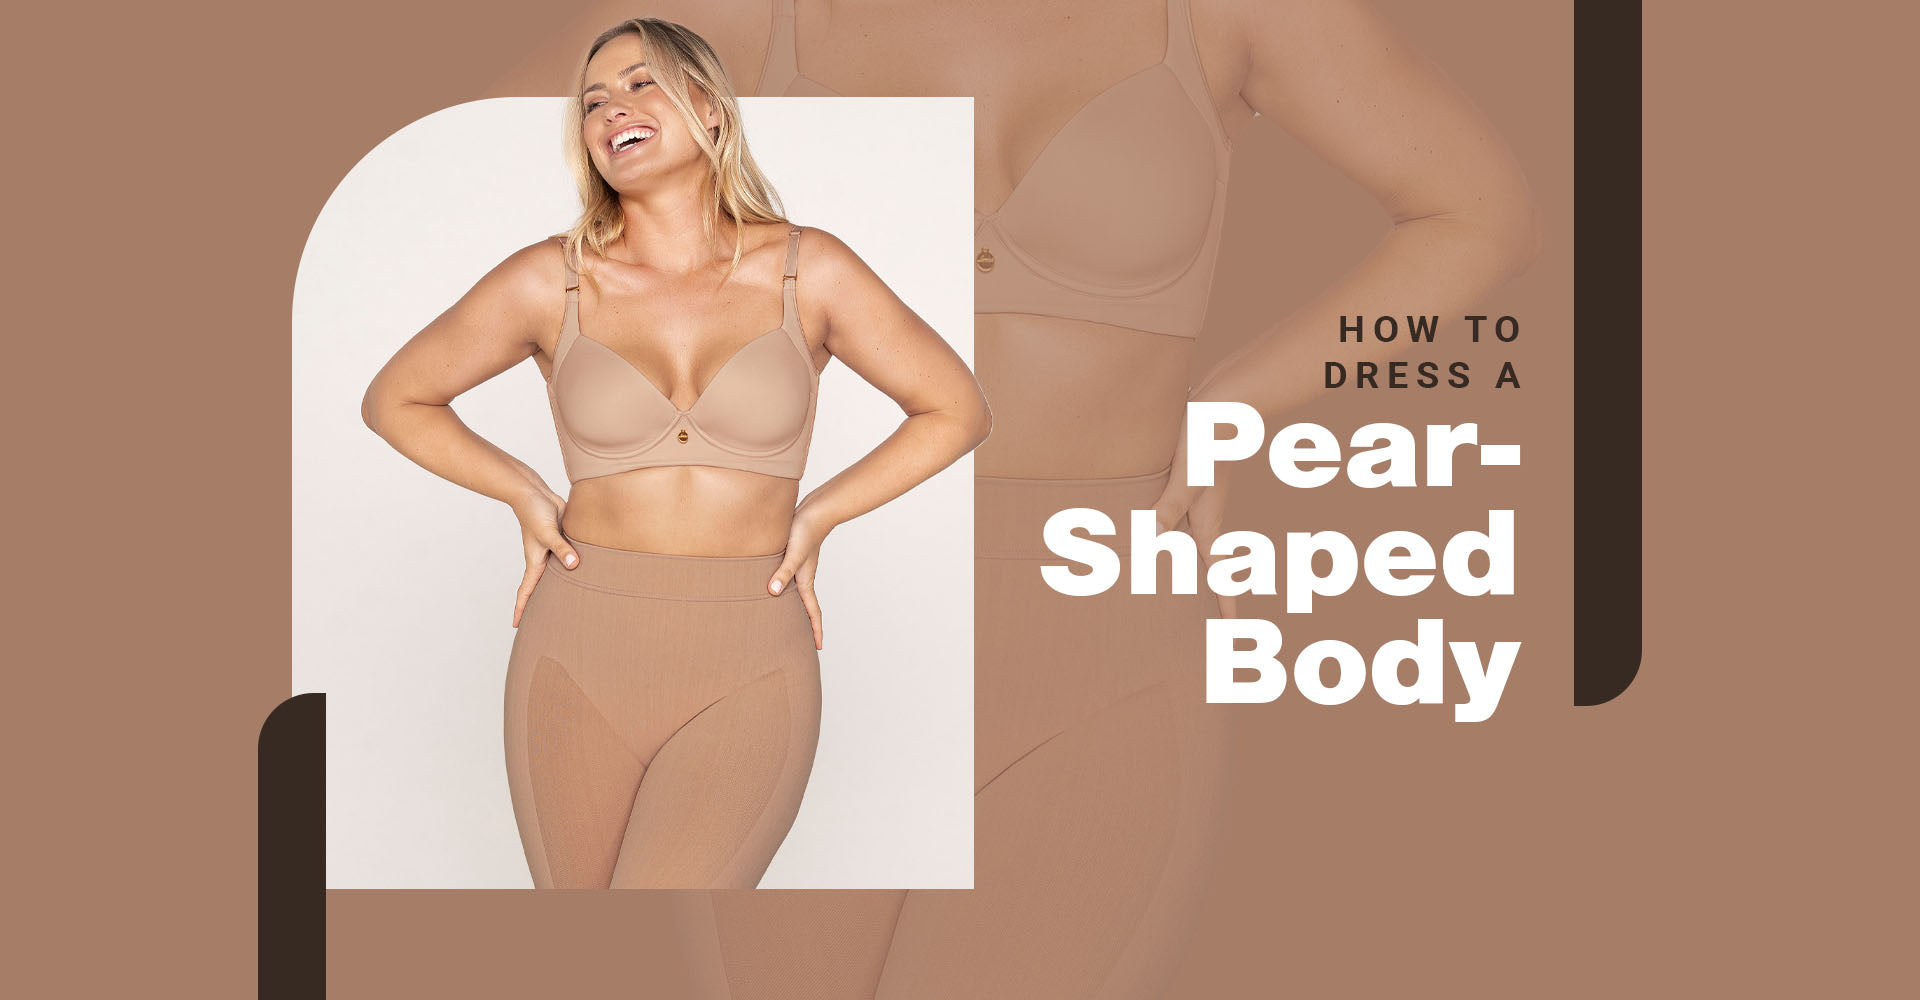 GUIDE ON HOW TO DRESS A PEAR SHAPED BODY, Gallery posted by ADALAYN